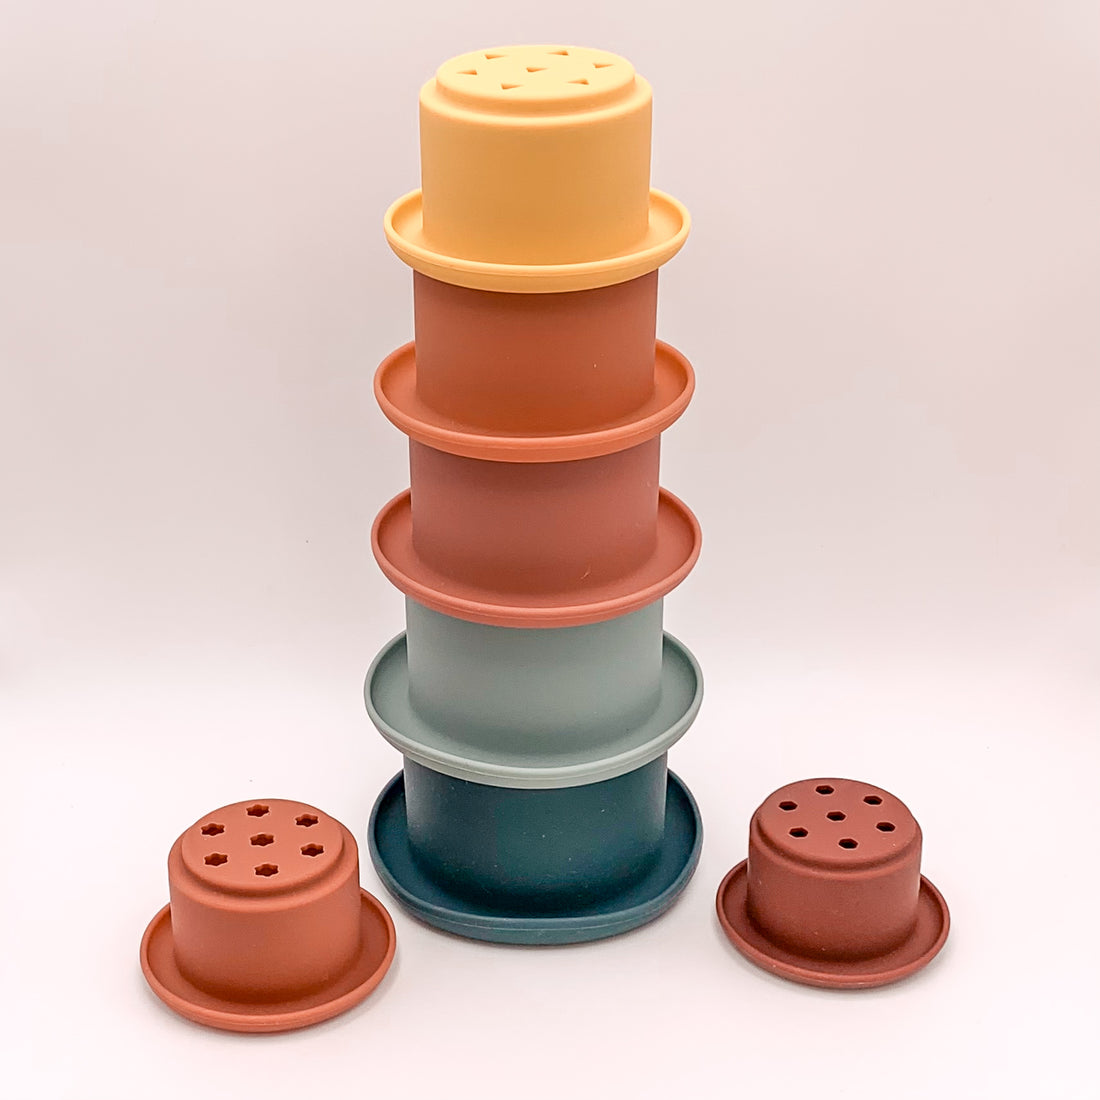 The Silicone Stacking Tower